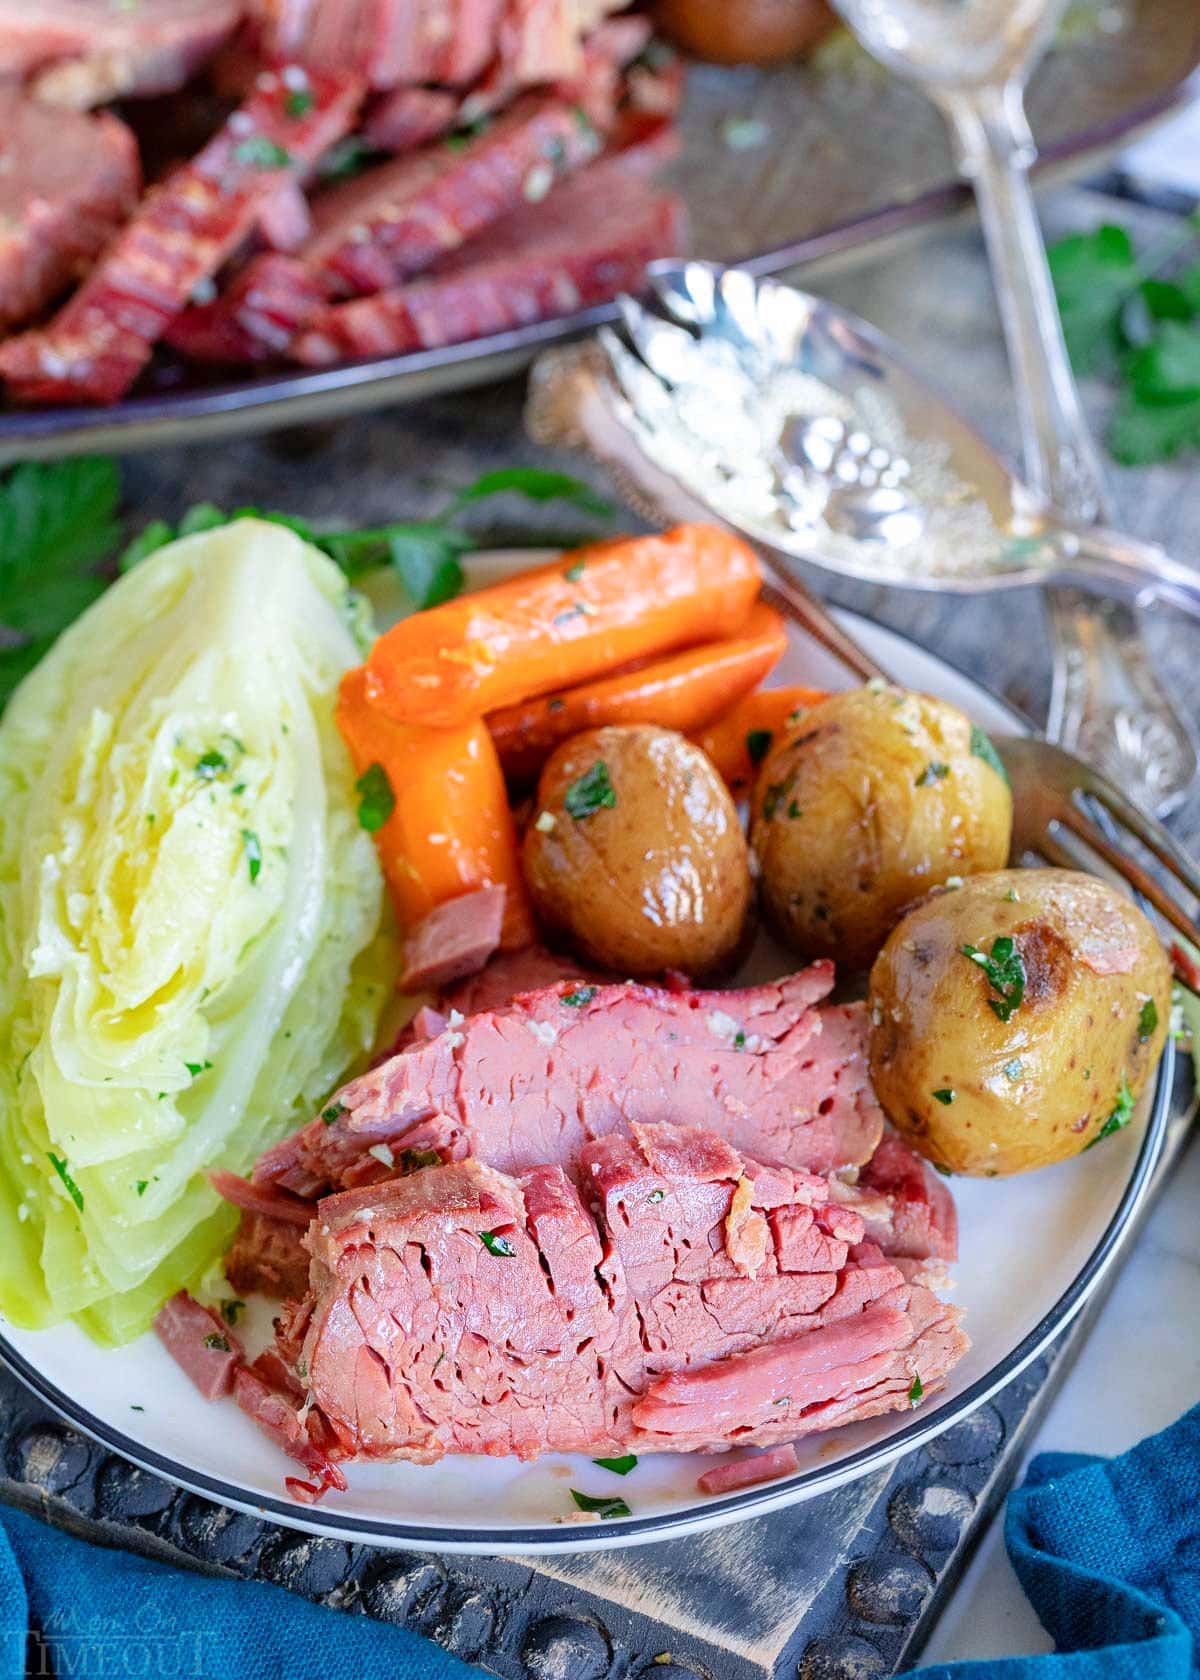 plate with a few slices of corned beef and cabbage, potatoes and carrots sitting on a gray wood board with serving plate in background.